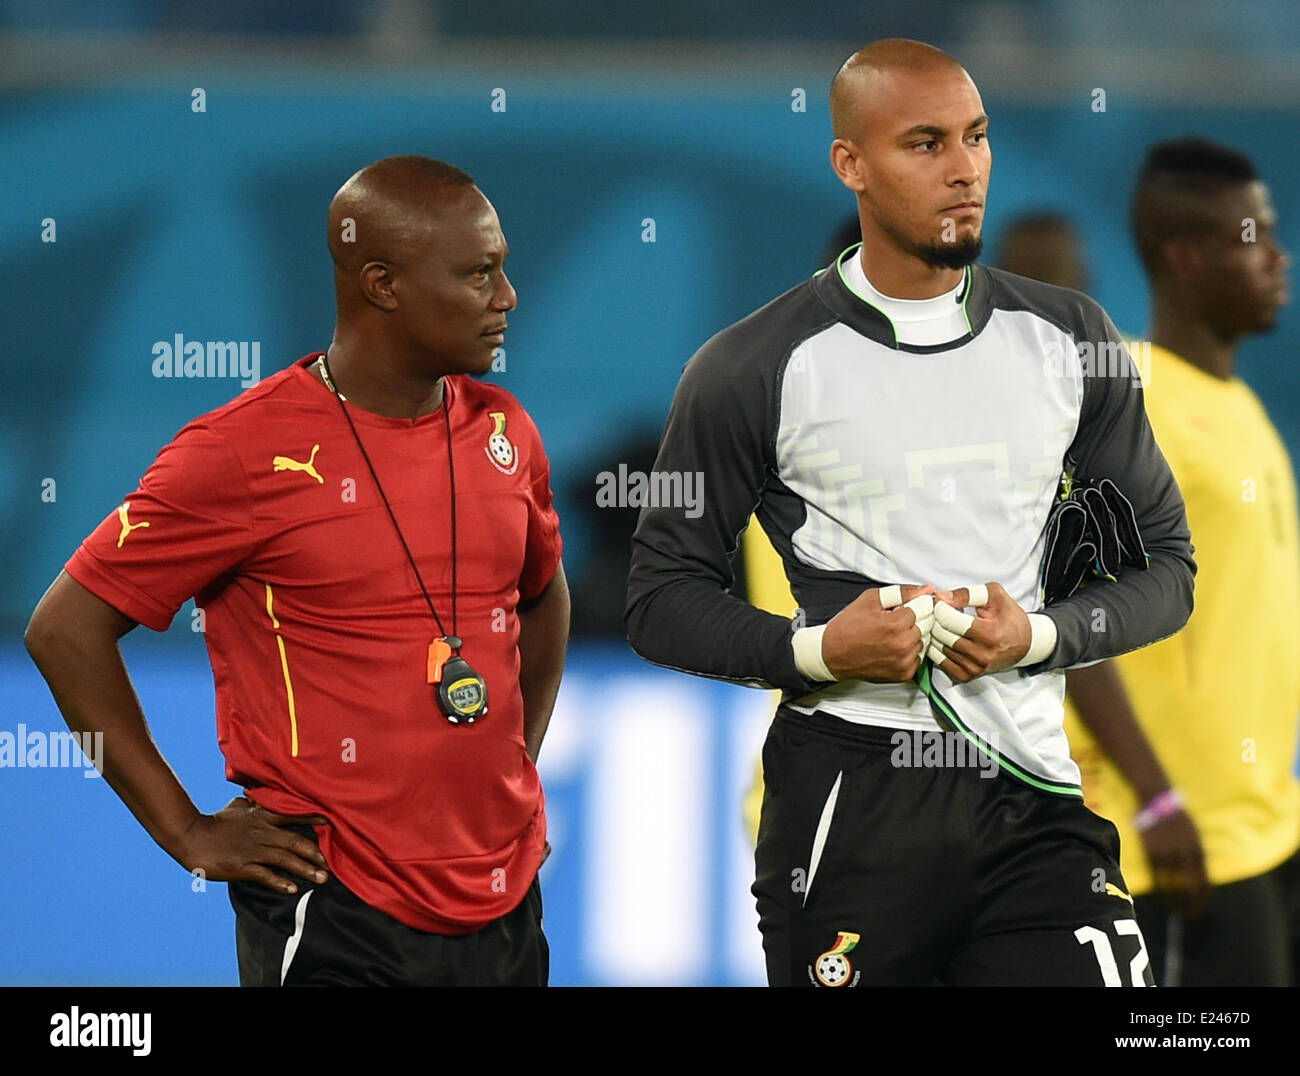 Natal, Brazil. 15th June, 2014. Head coach James Appiah and goalkeeper Adam Kwarasey (R) during a training session of Ghana's national soccer team at the Arena das Dunas Stadium in Natal, Brazil, 15 June 2014. Ghana will face USA in their group G preliminary round match at the FIFA World Cup 2014 on 16 June 2014 in Natal. Photo: Marius Becker/dpa/Alamy Live News Stock Photo